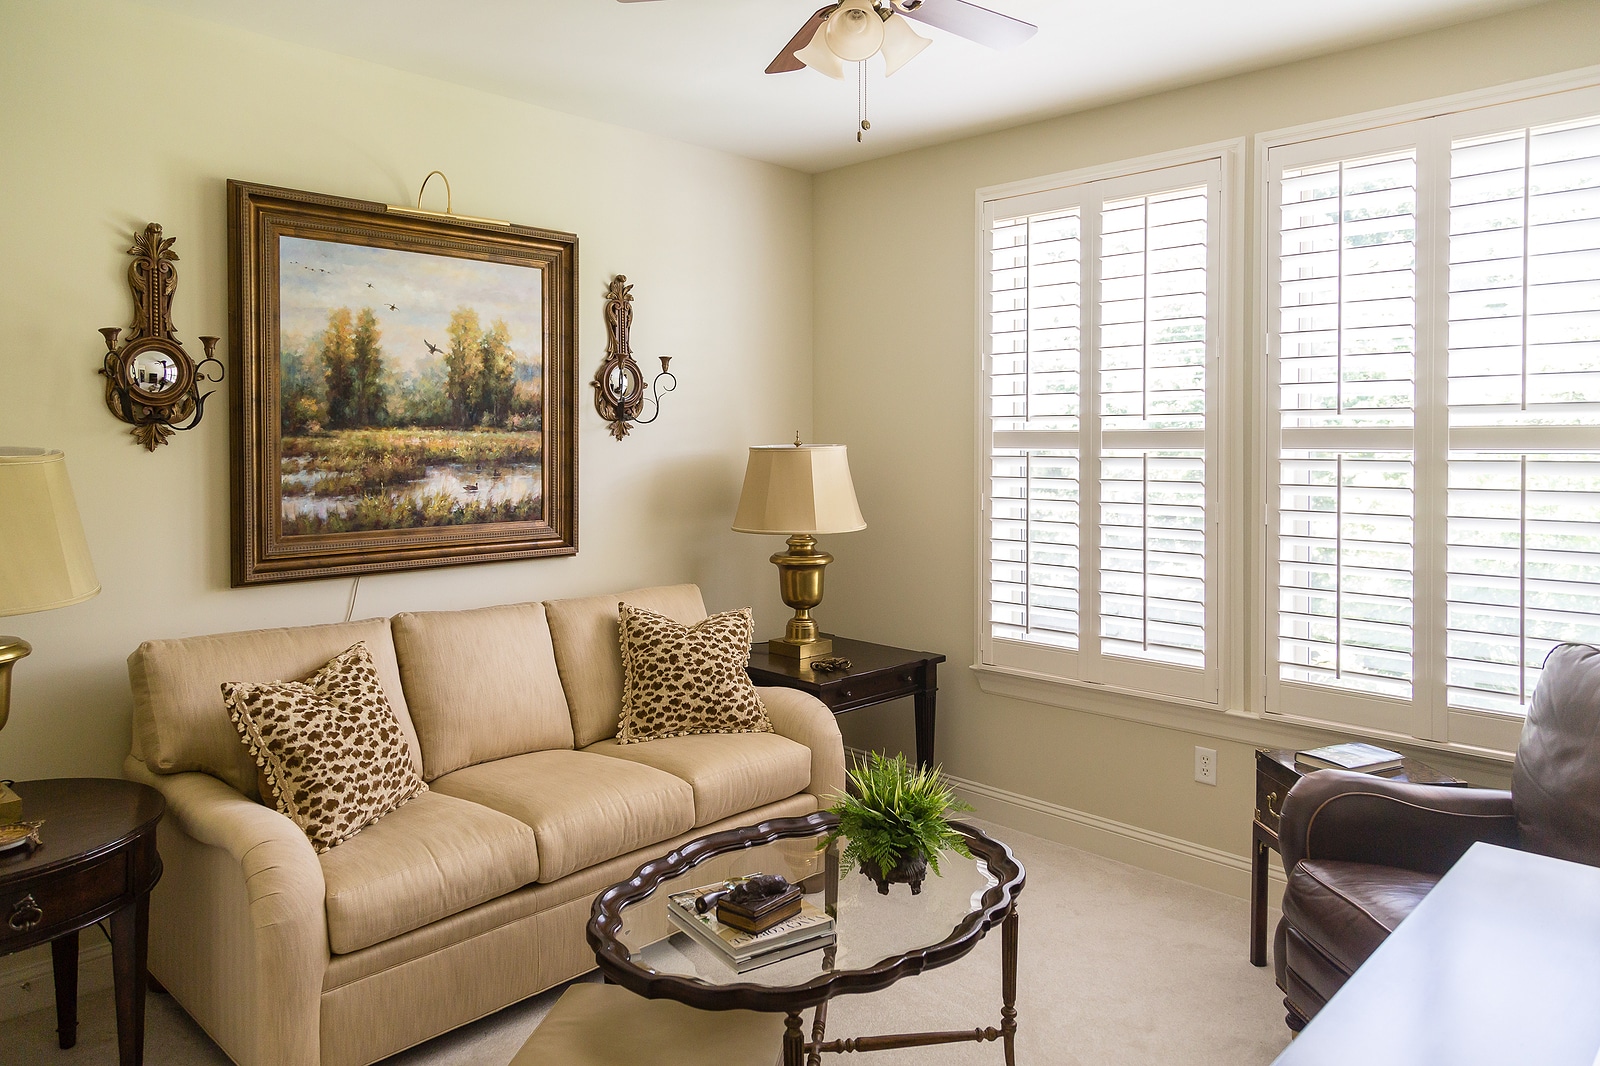 Blog,iStyle Shutters - Blog